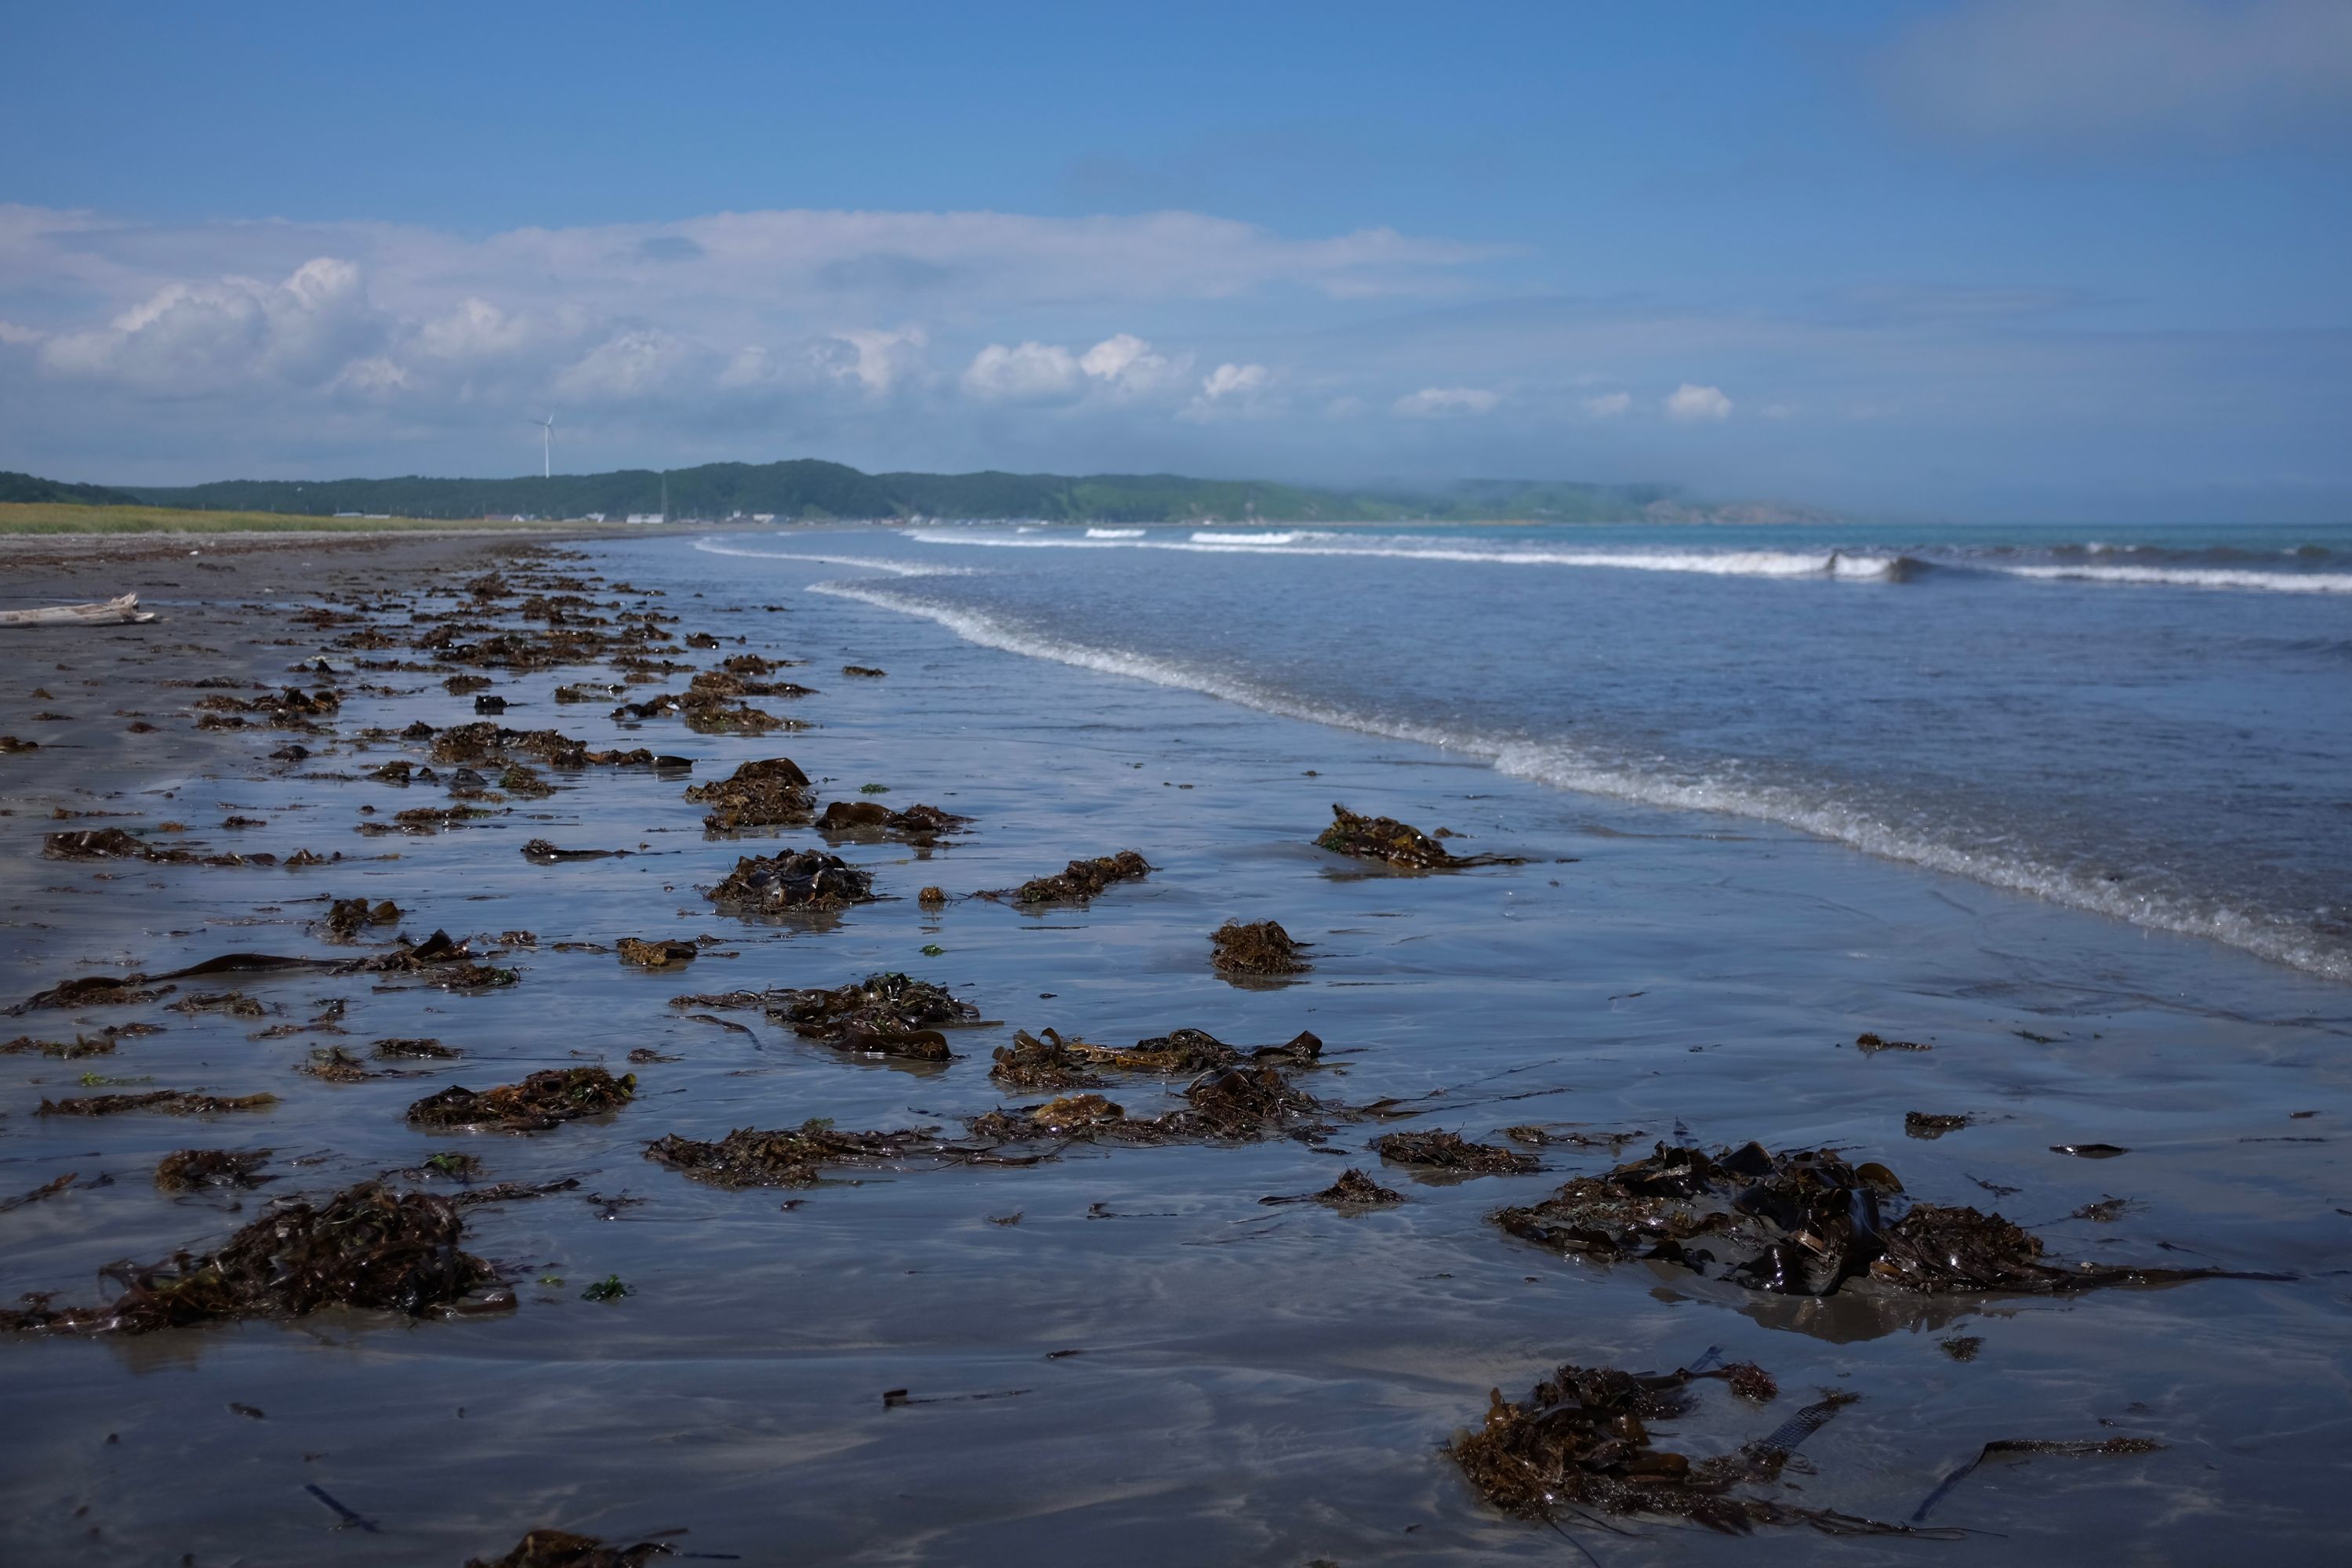 Panorama of a beach with kelp in the surf.